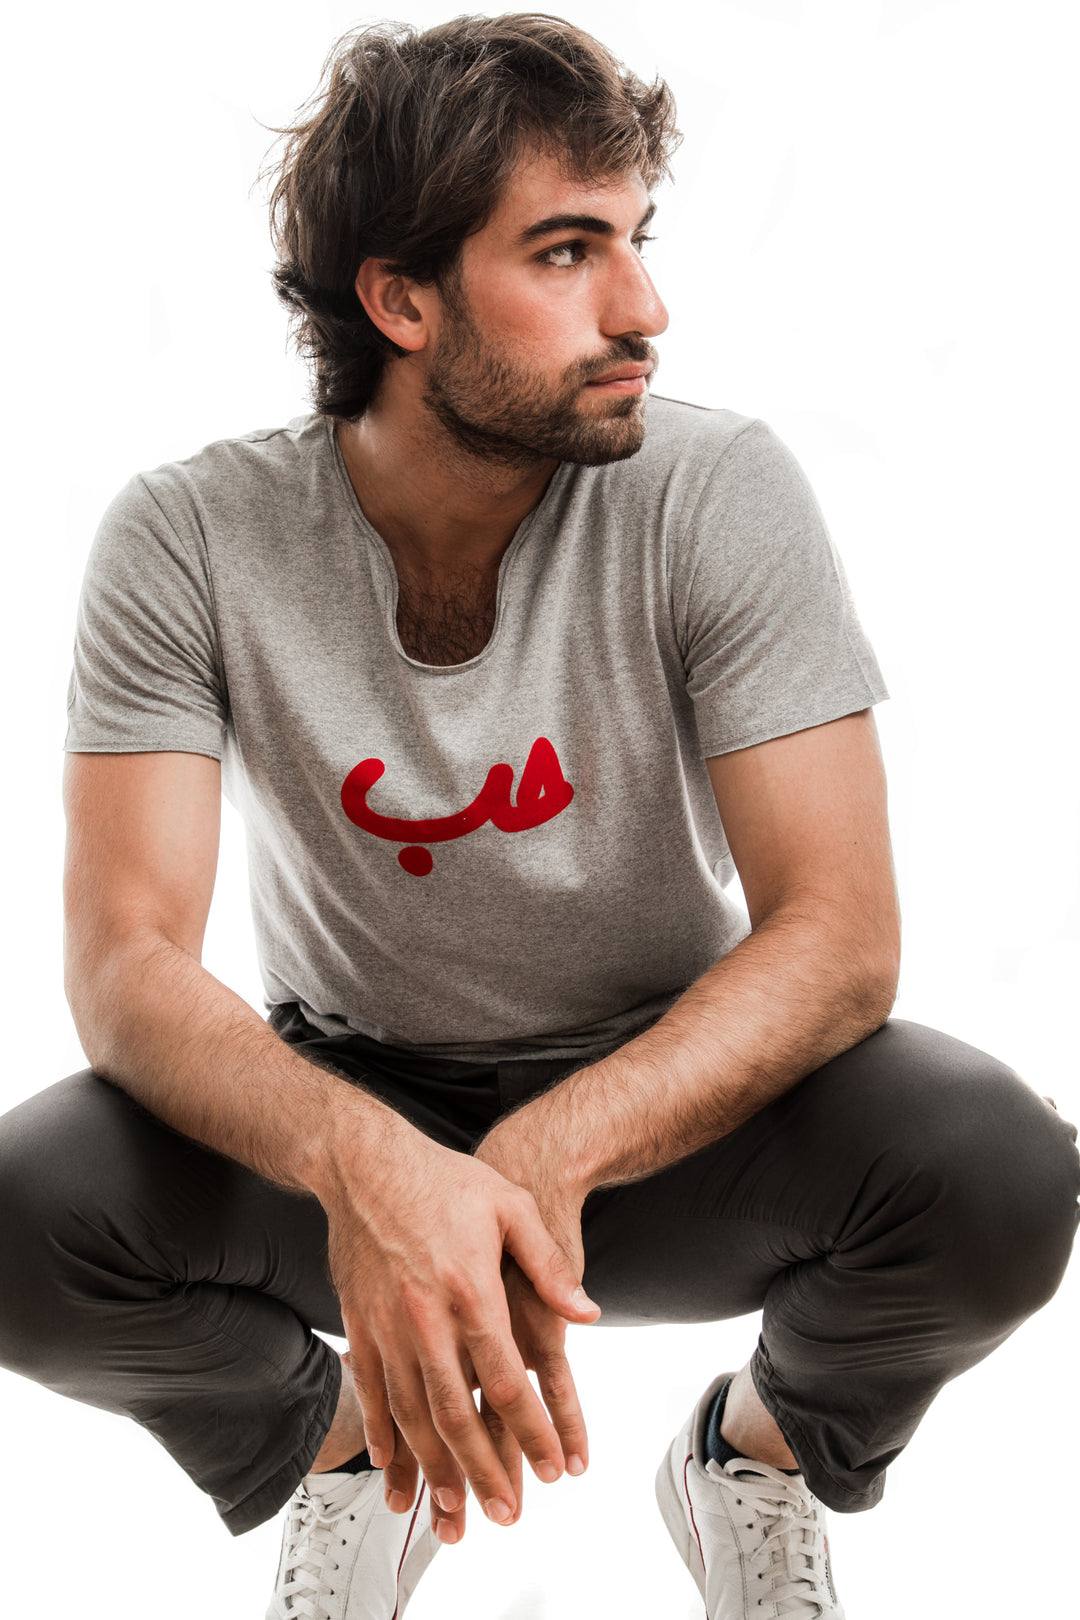 Young adult male wearing grey T-shirt with Hobb written in Arabic حب and printed in red velvet in the center of the T-shirt along with black pants and white sneakers.